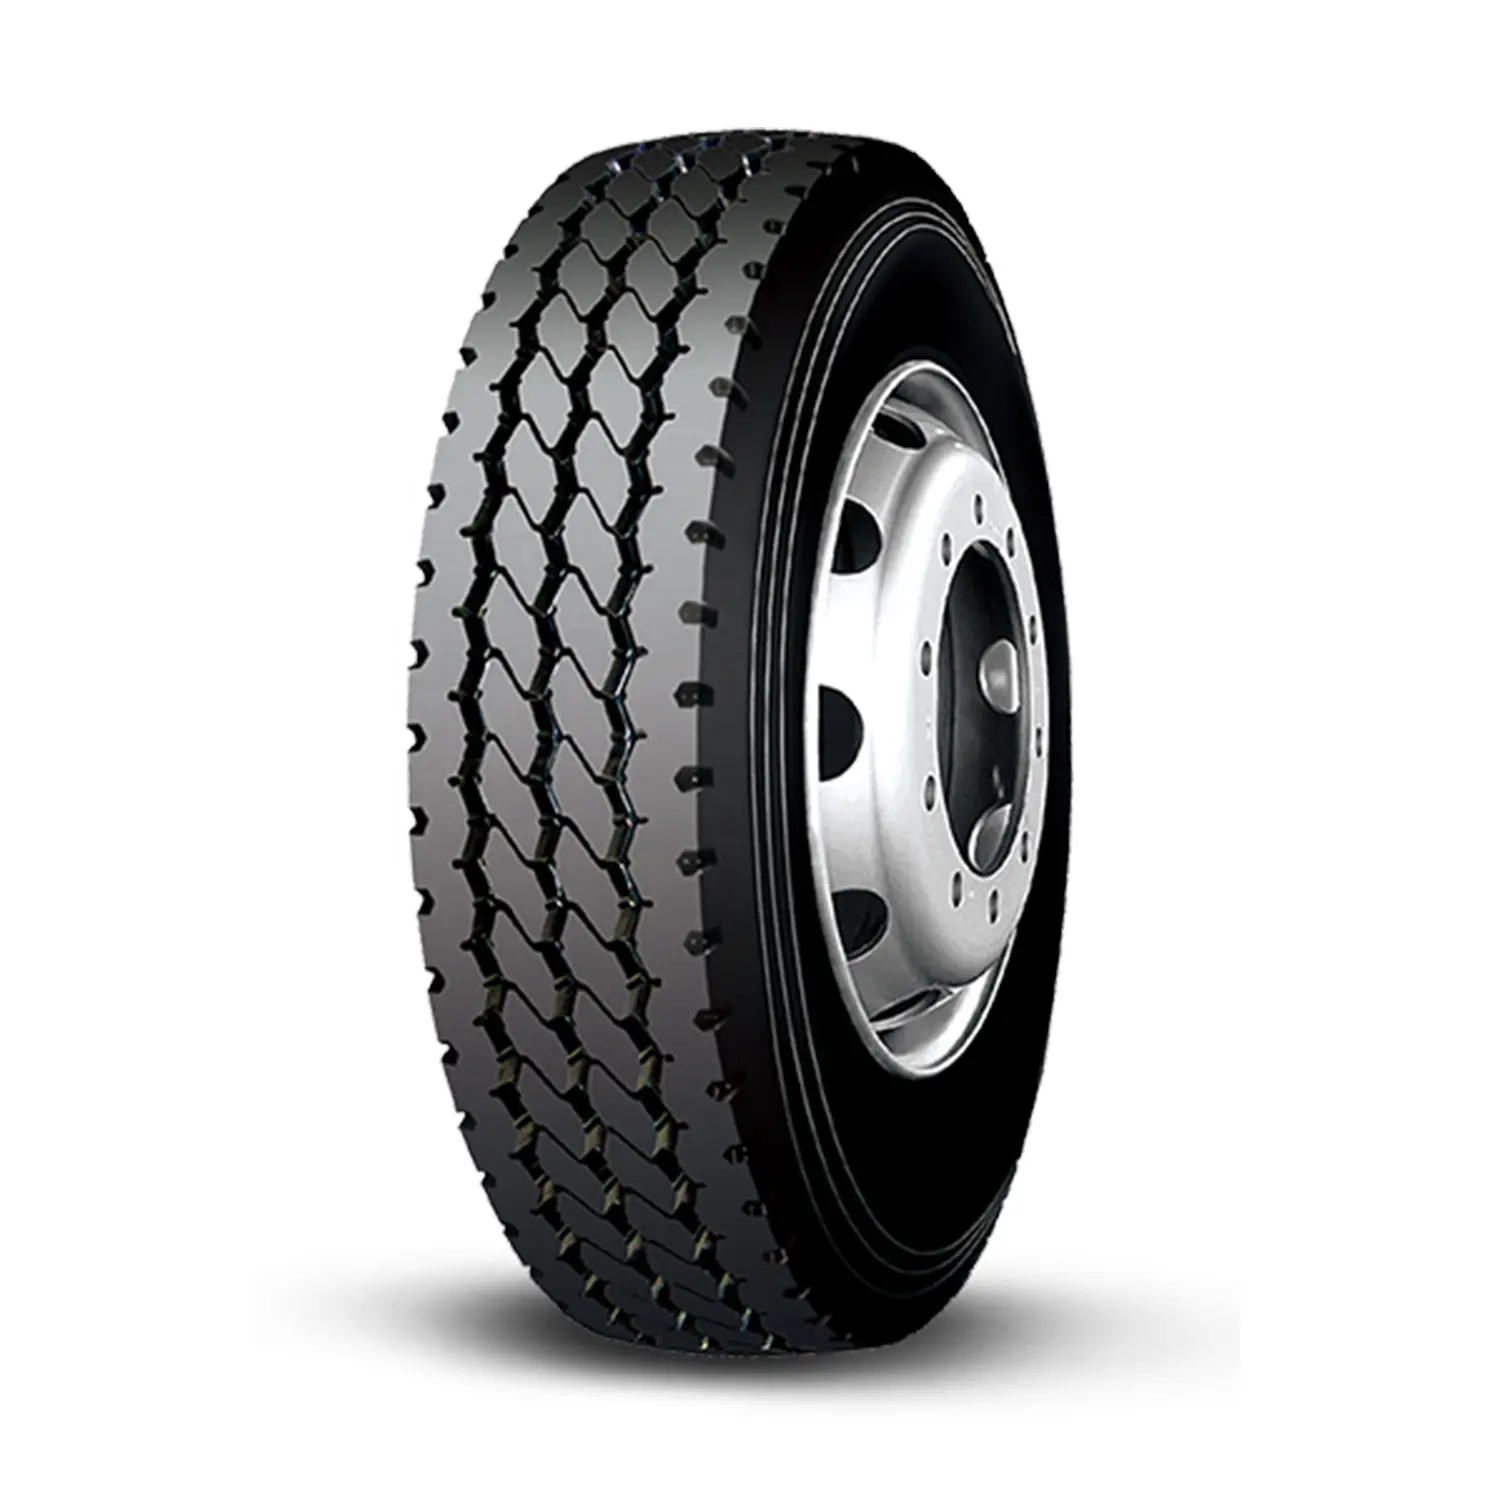 Container Truck Tire for 13R22.5 12R22.5 11R22.5 295 80R22.5 315 80R22.5 DOT ECE PM519 7 Years Quality 250000 km Mileage Warran